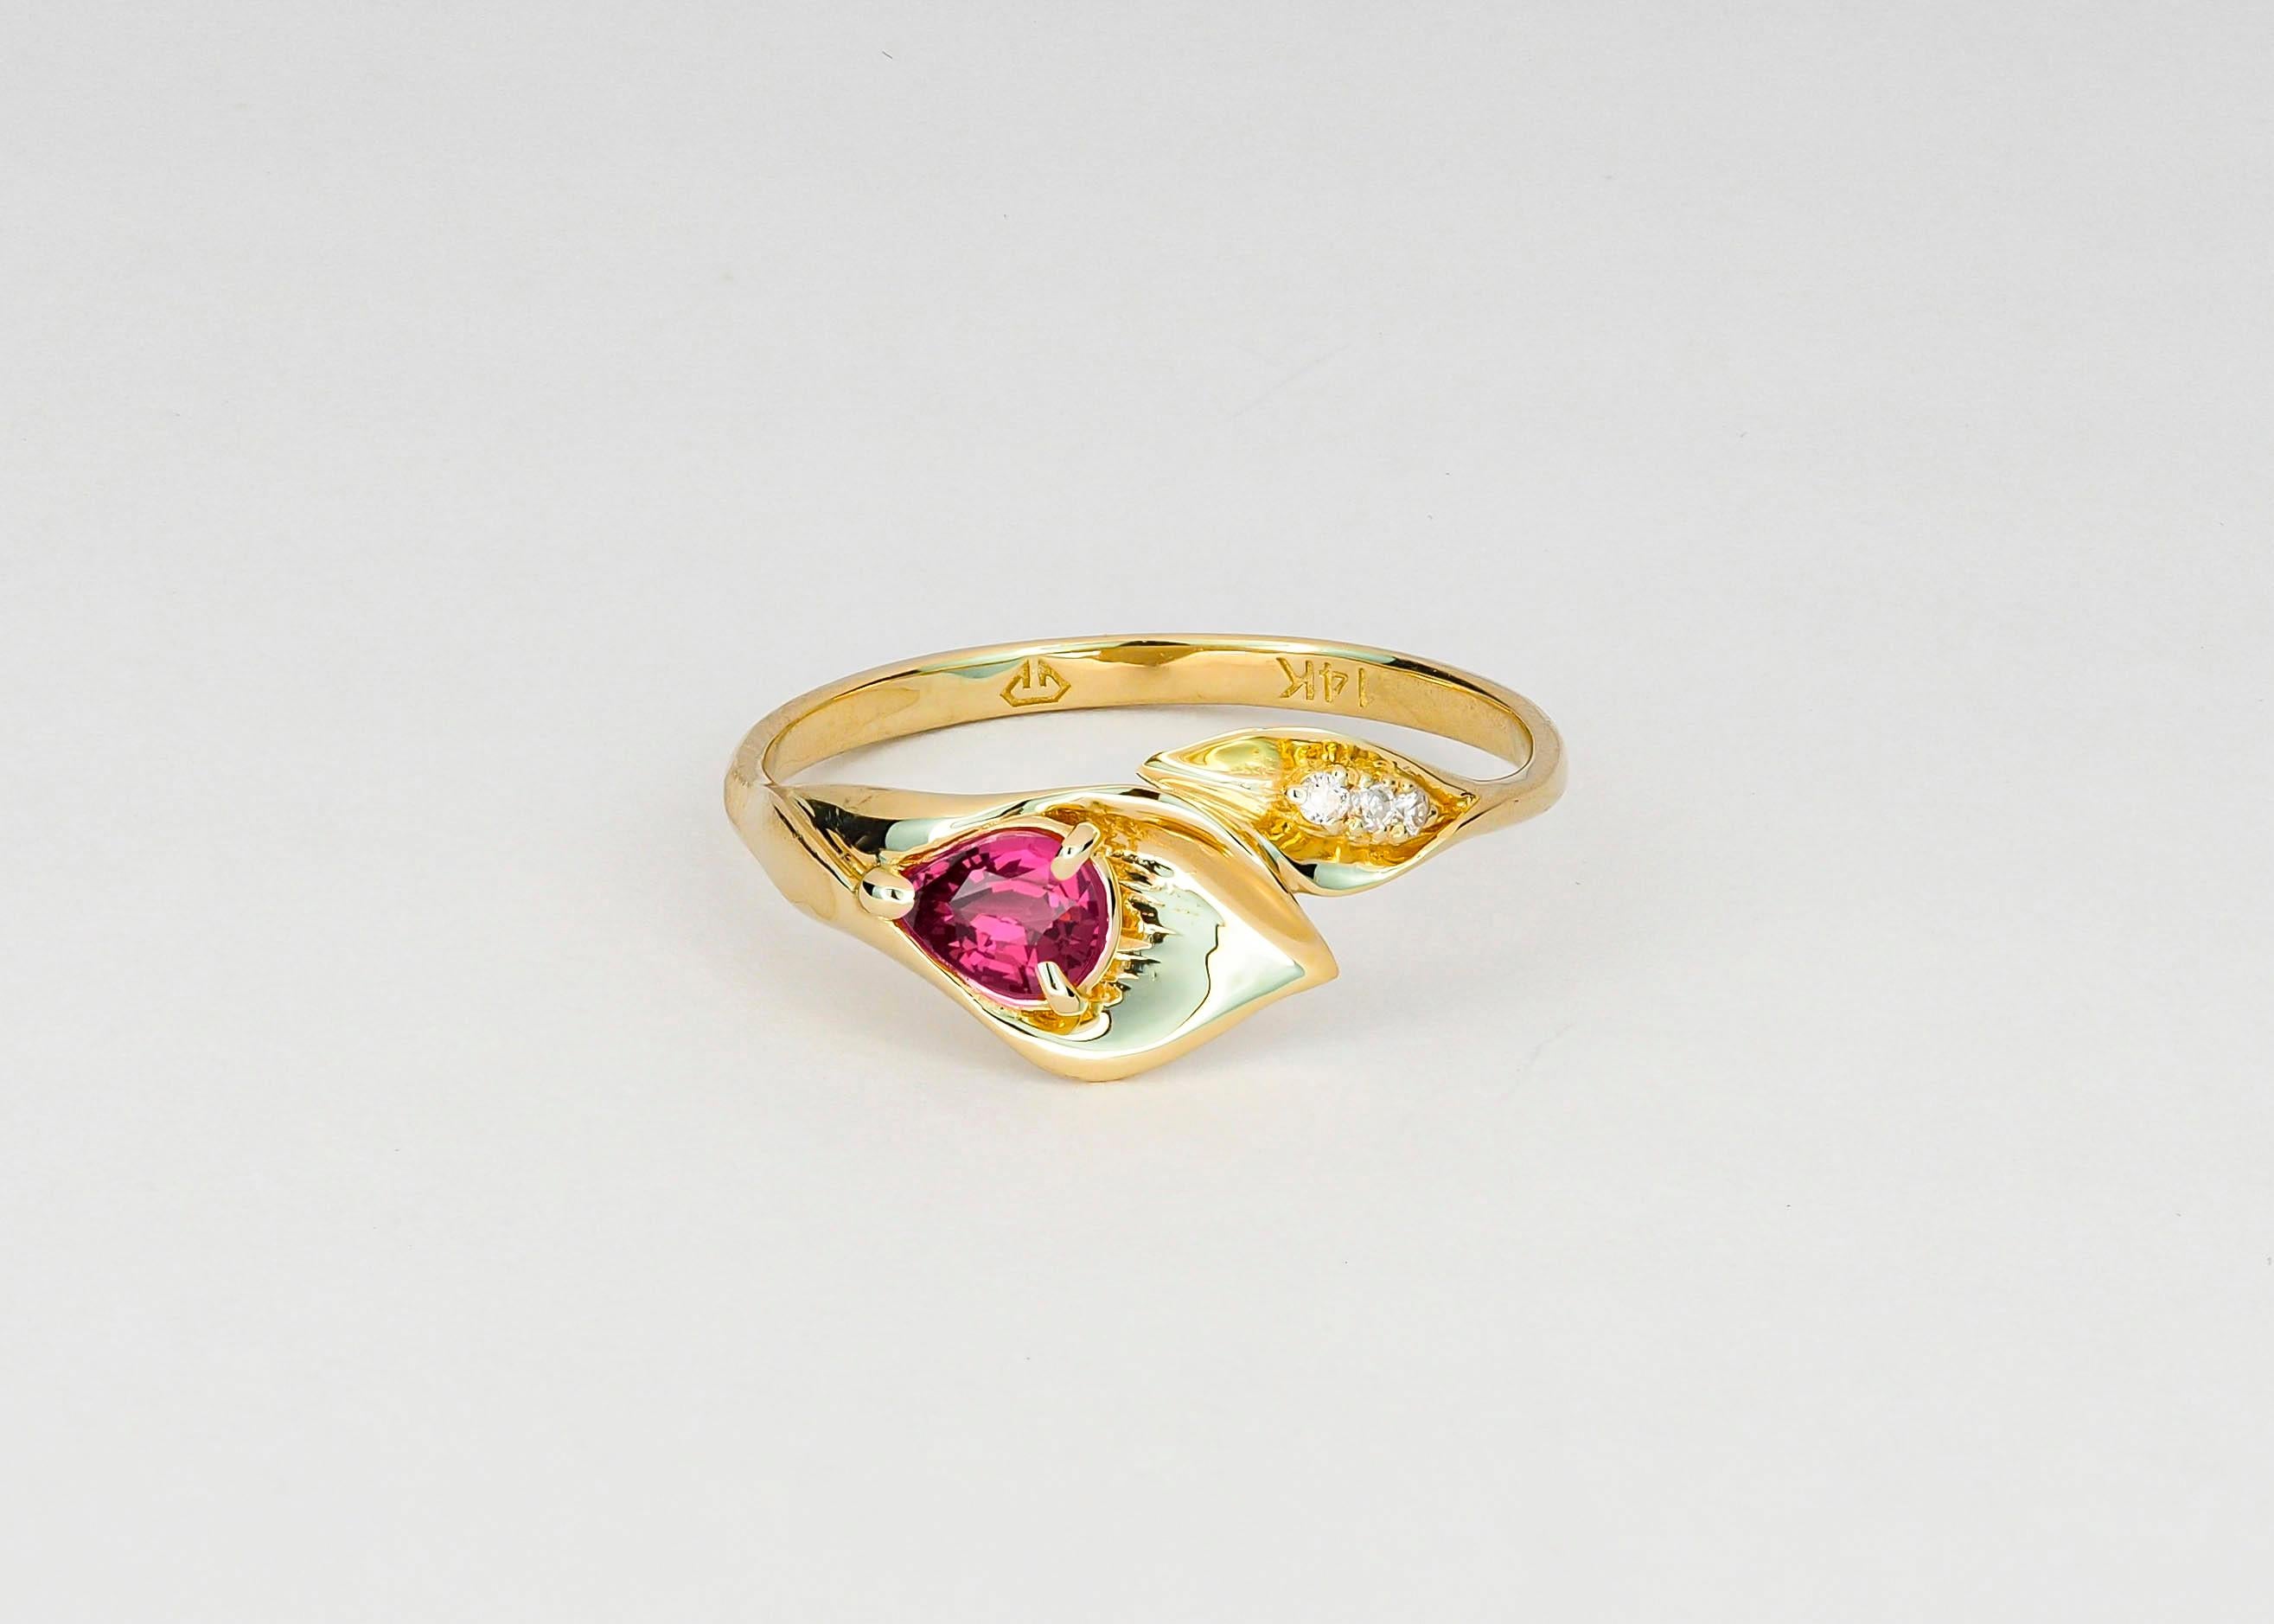 For Sale:  Lily Calla Gold Ring, 14 Karat Gold Ring with Garnet and Diamonds 3